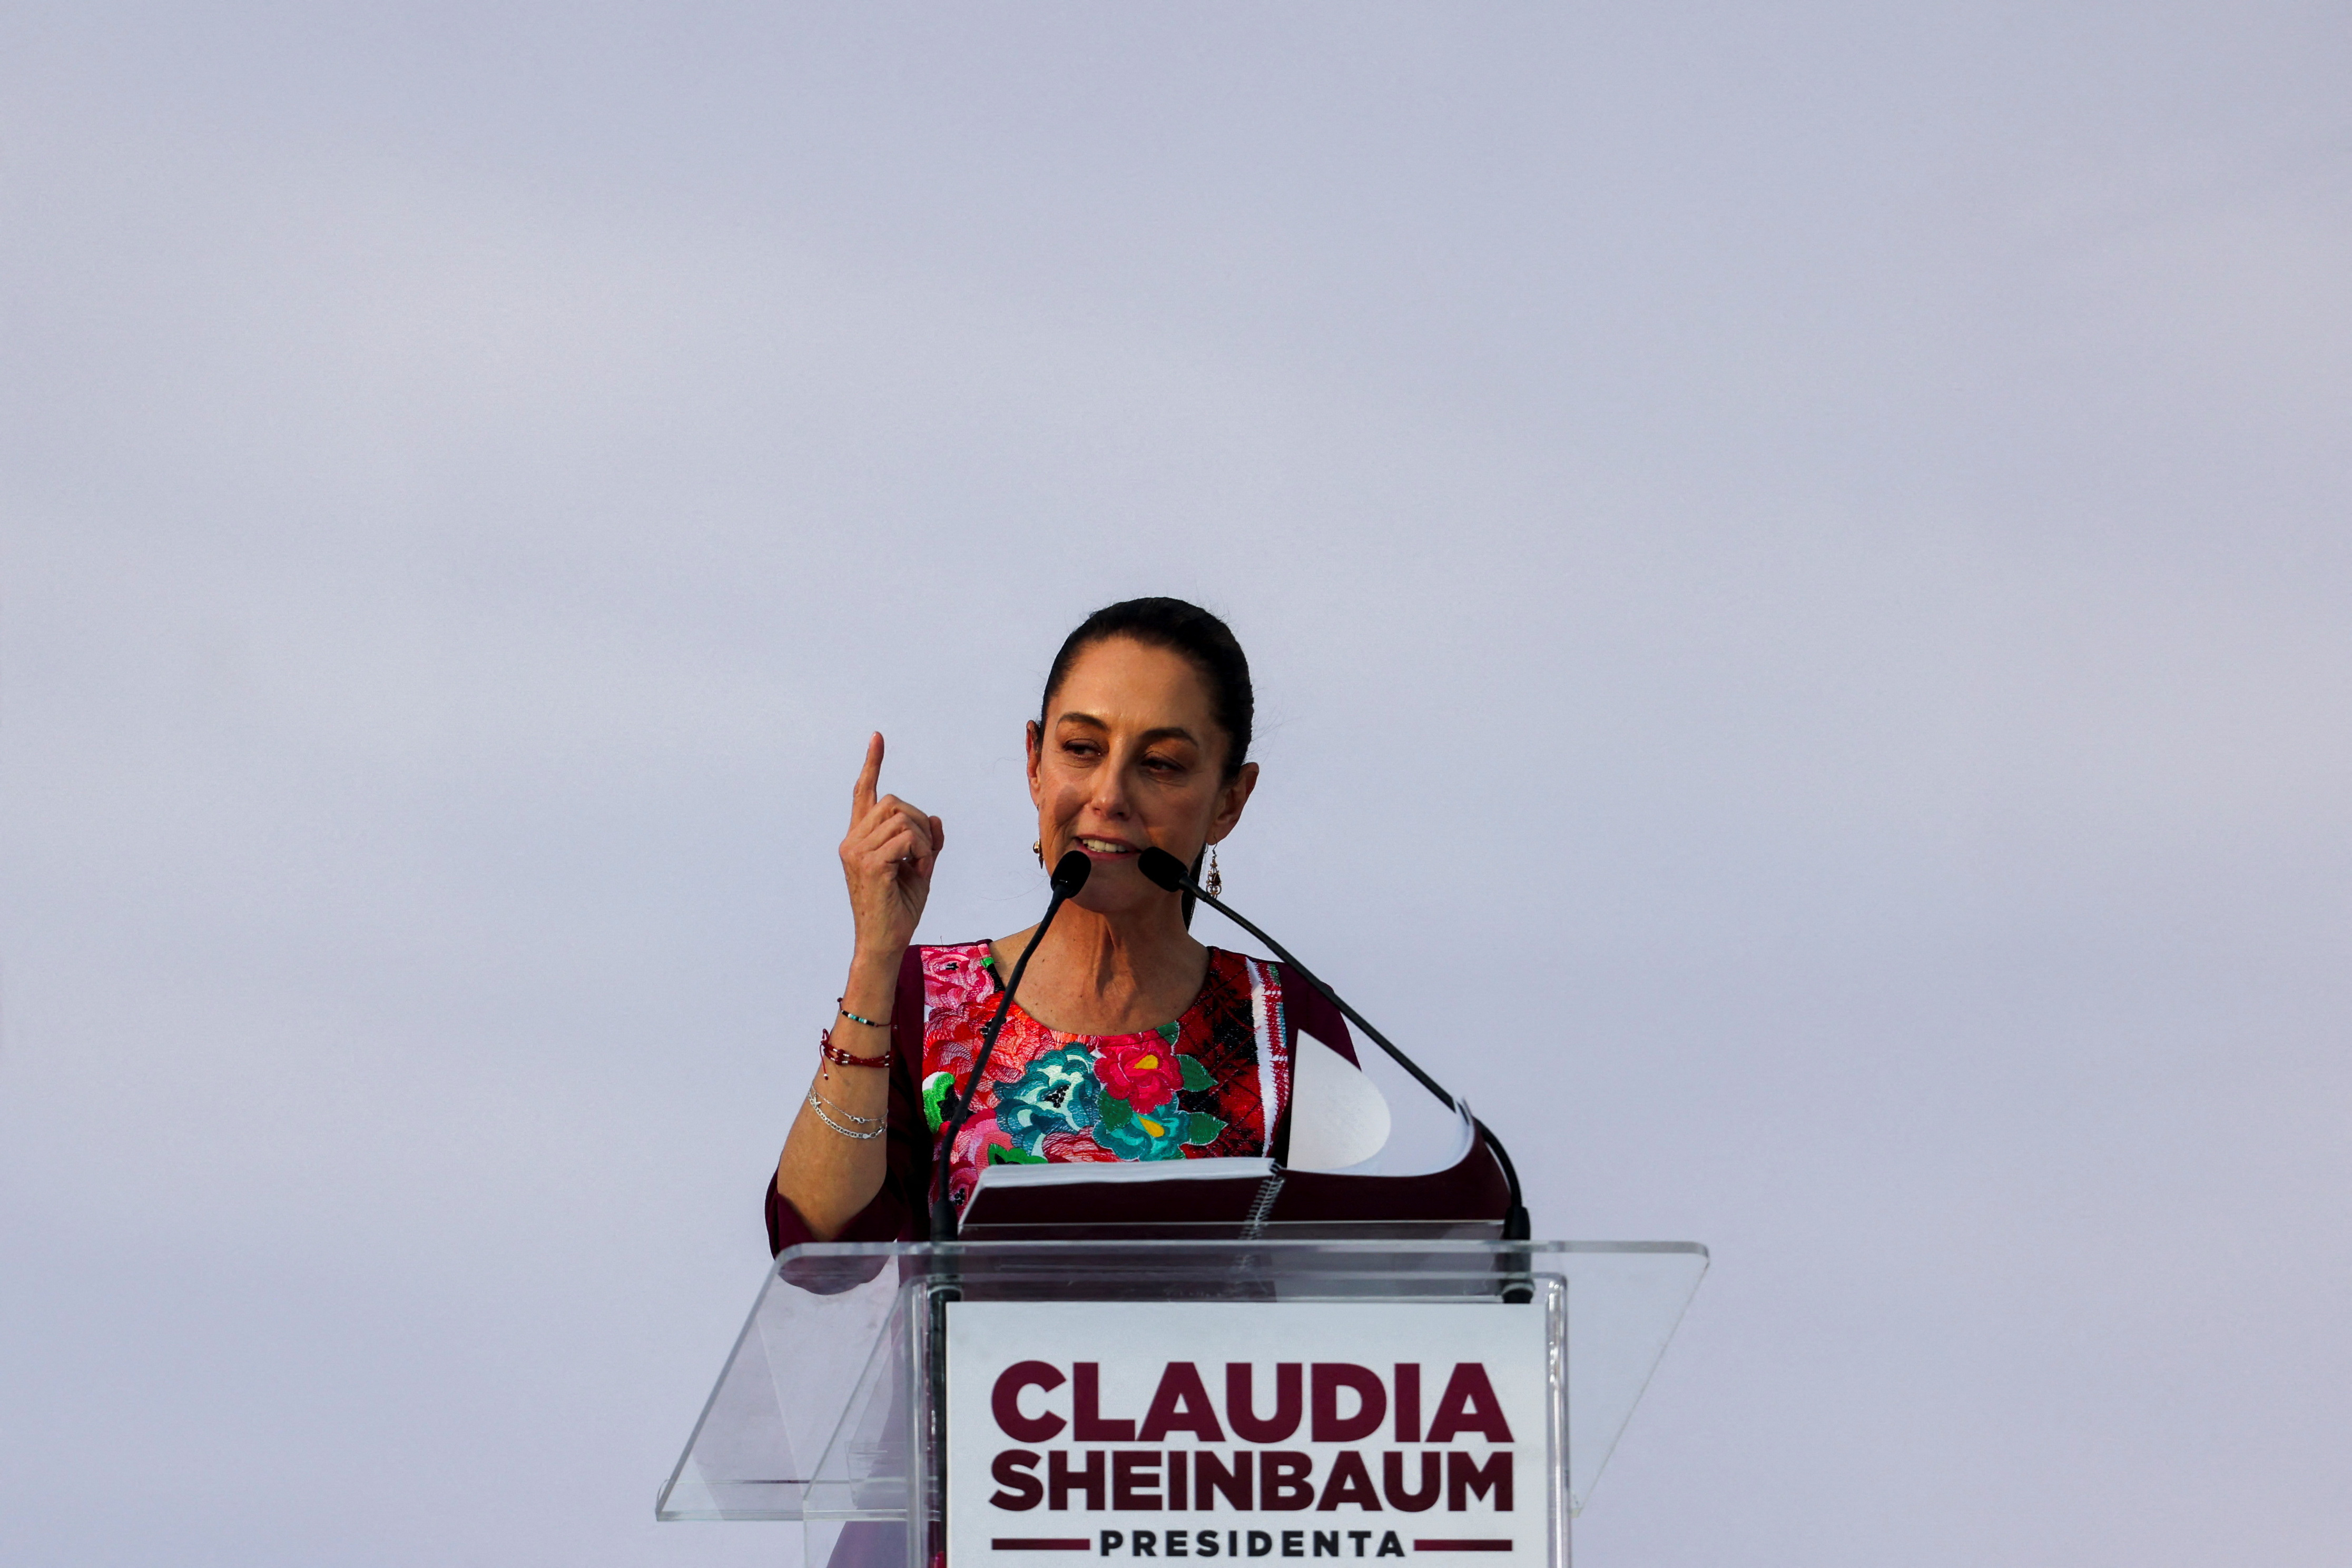 Presidential candidate of the ruling MORENA party Claudia Sheinbaum kicks-off her campaign, in Mexico City